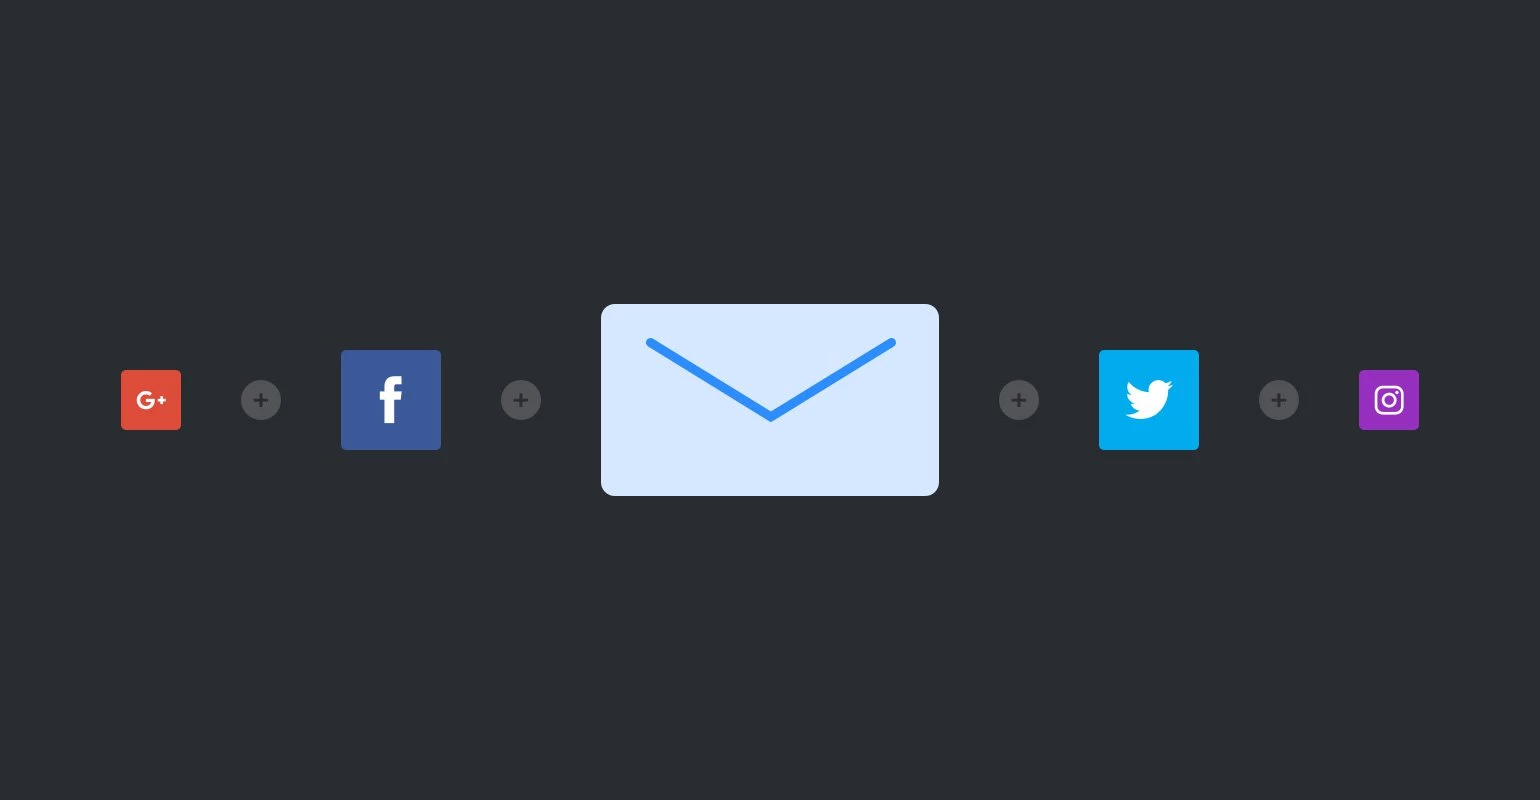 Integrating email and social media inbox icons - MailerLite